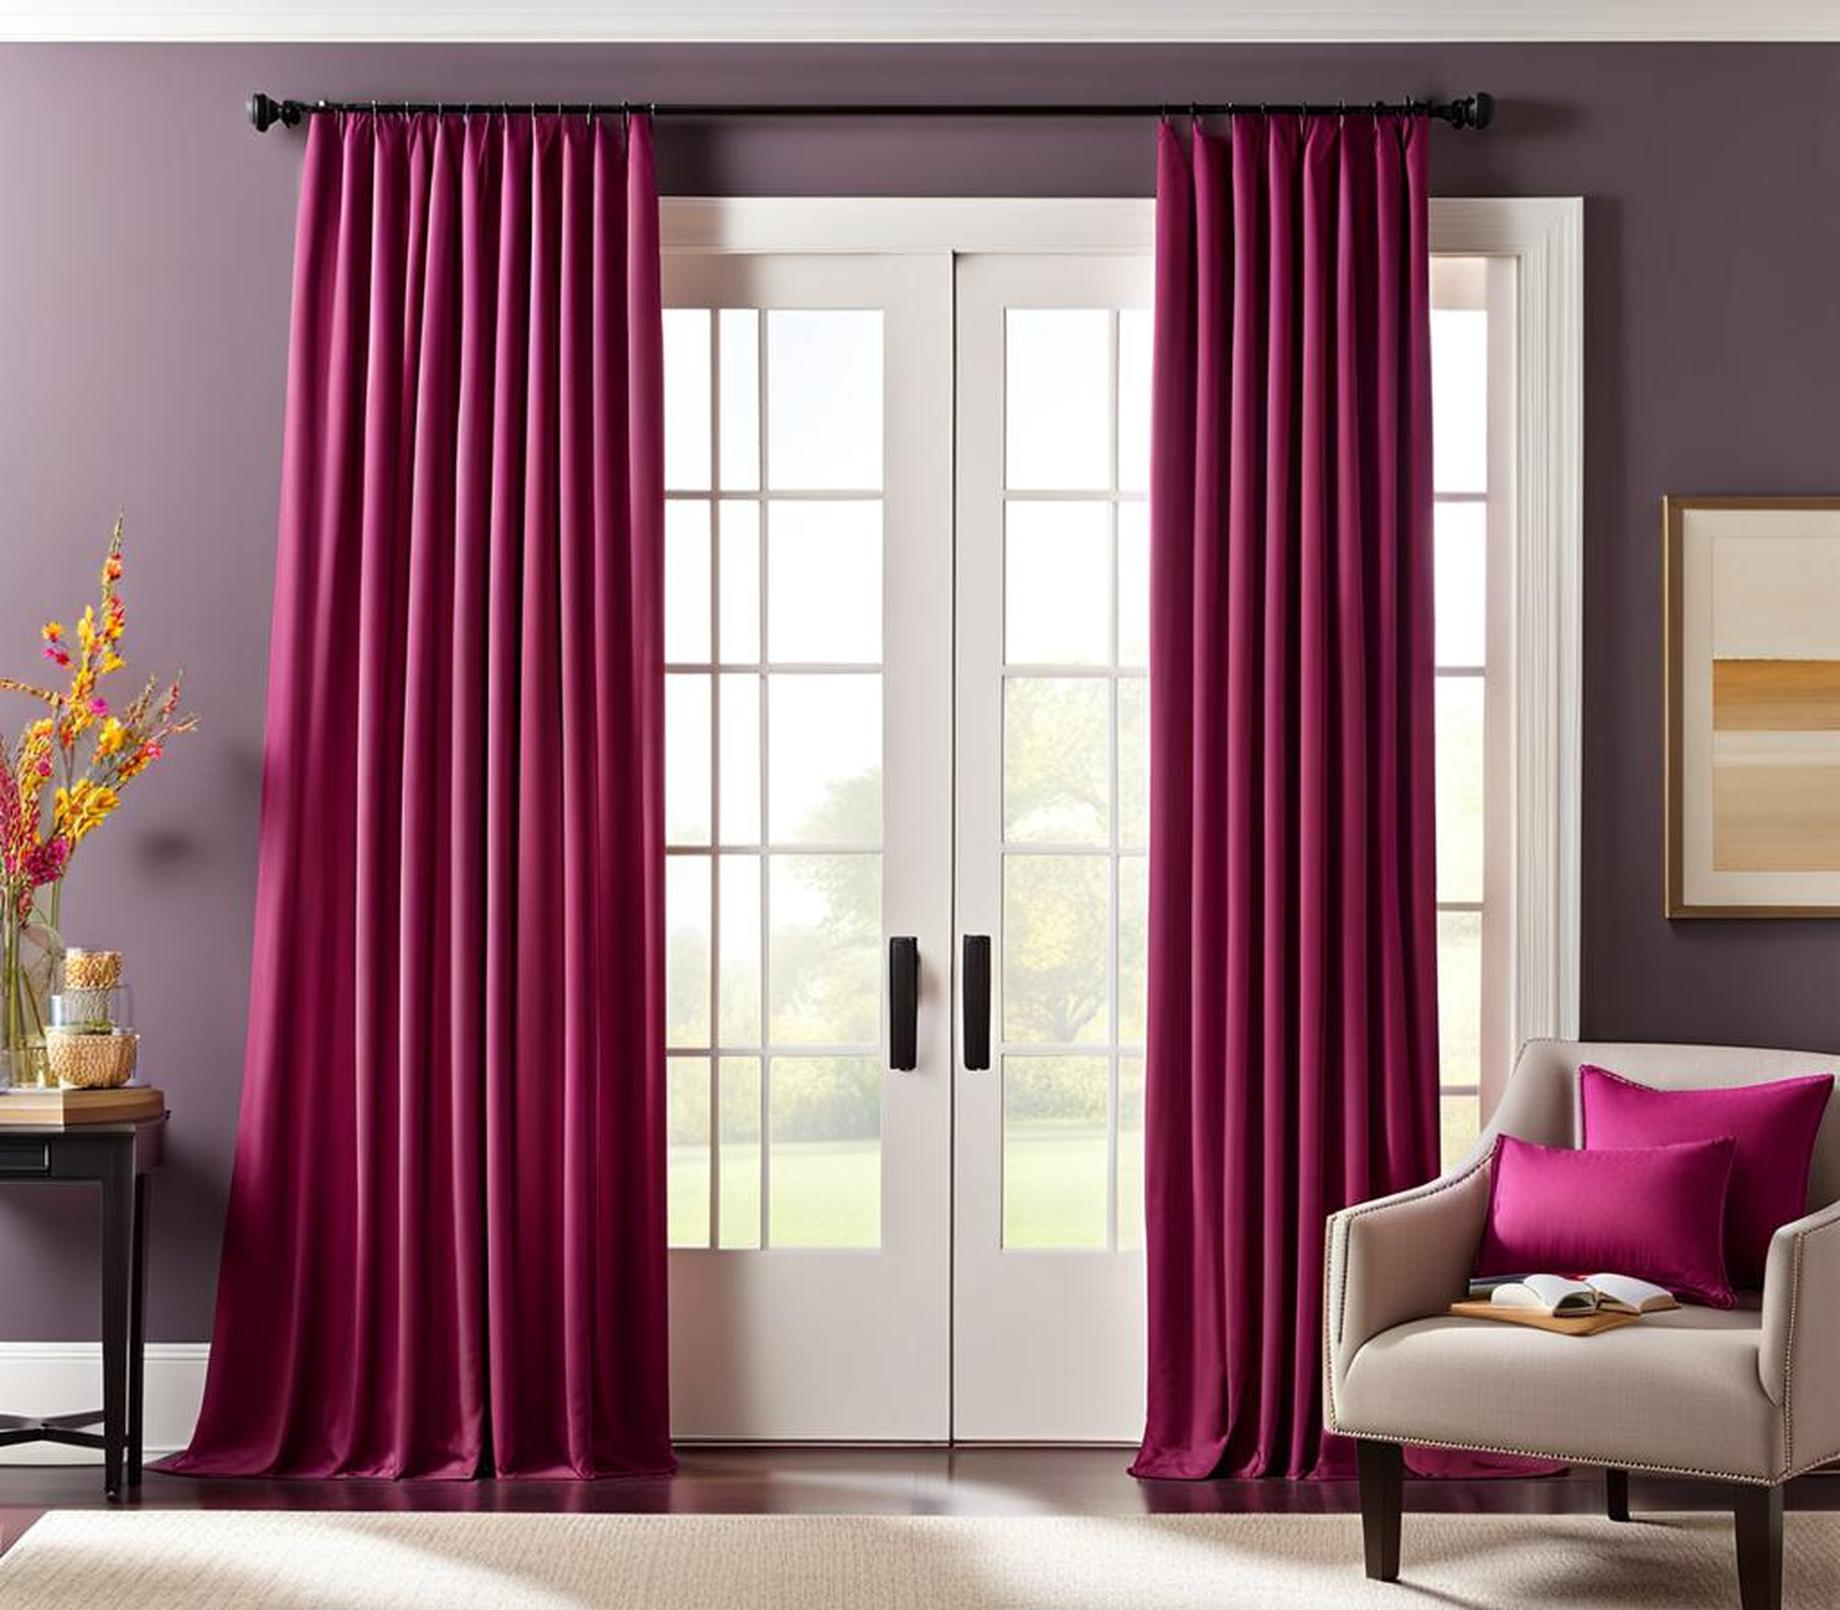 Expert Tips to Mix and Match Curtain Colors for a Pulled-Together Living Room